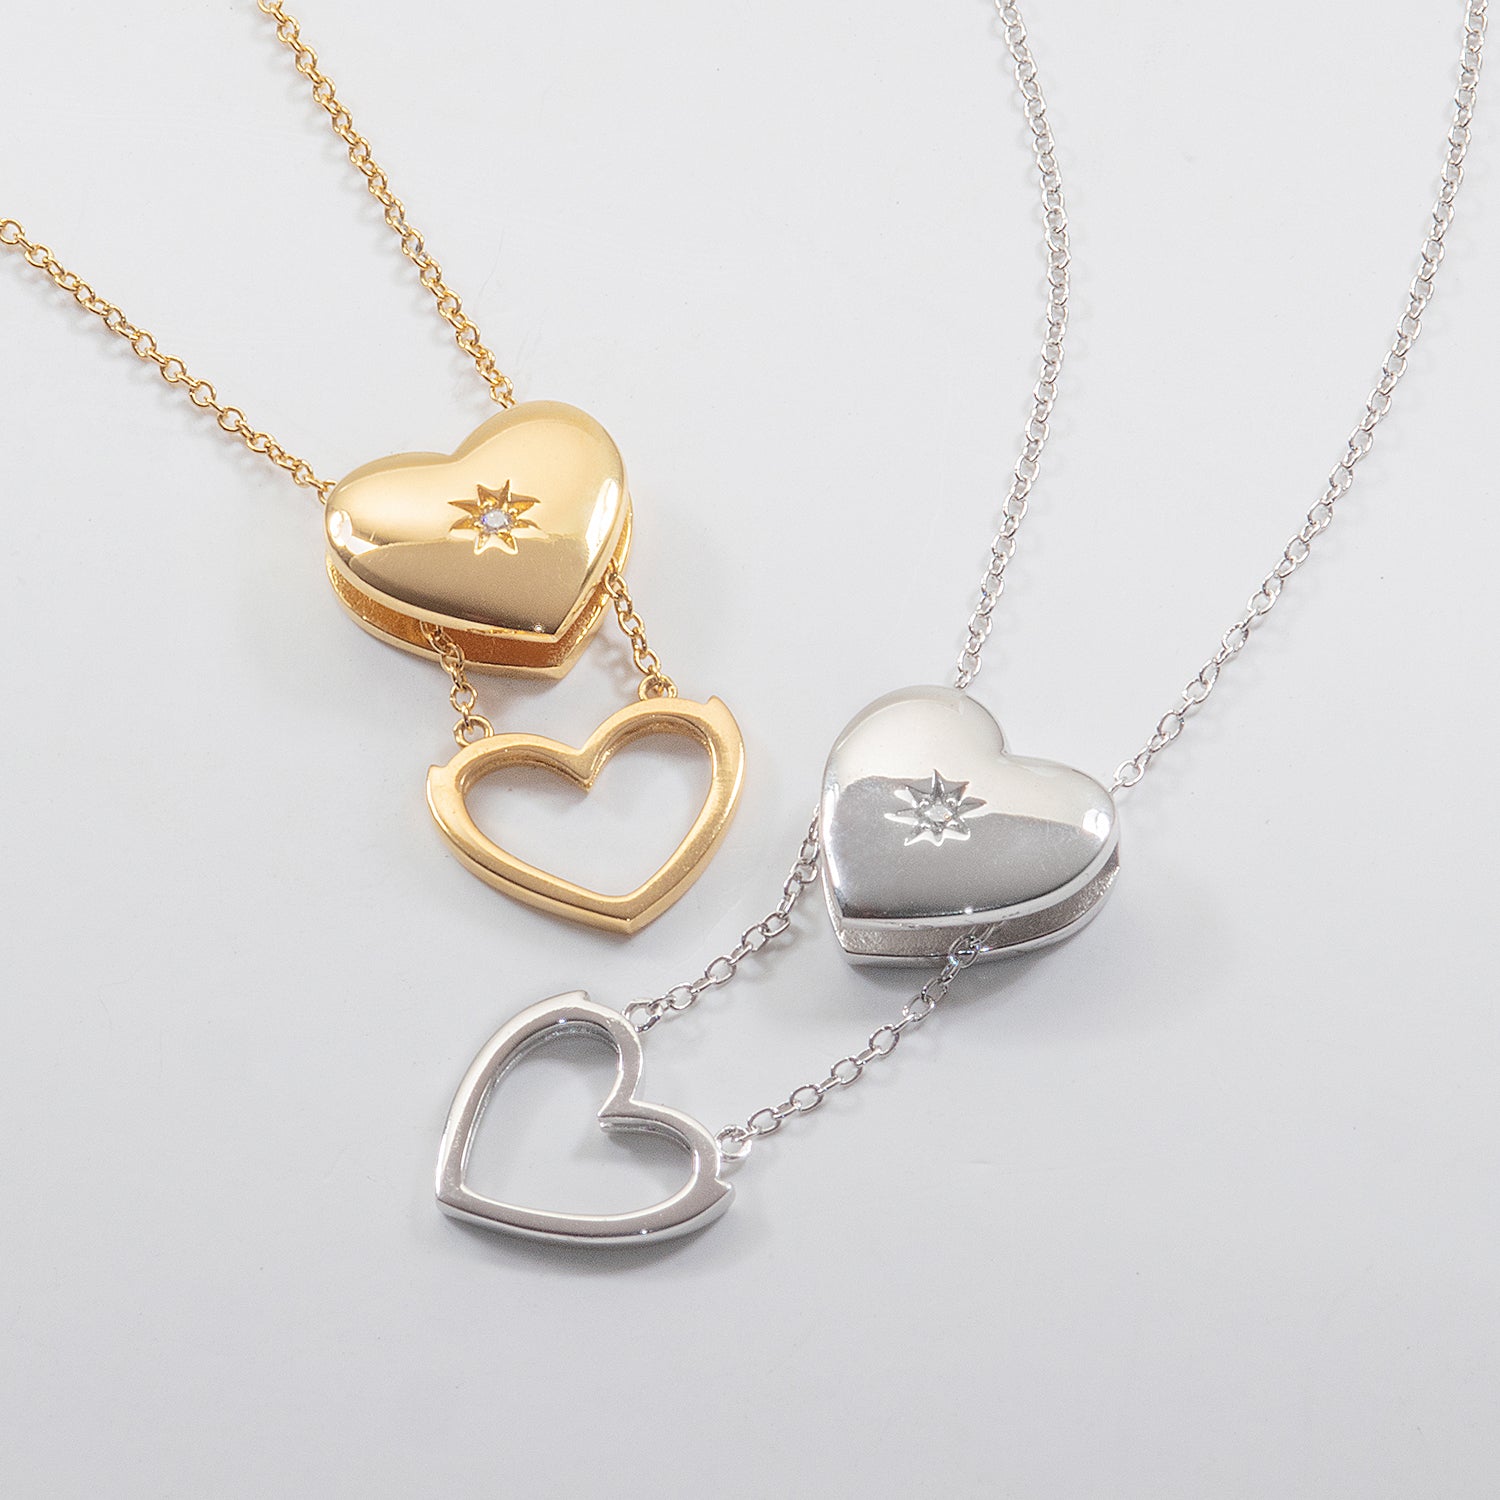 14k Gold Heart Necklace/ Heart Necklace/ Gold Necklaces/ Love Necklace/  Minimalist Heart Necklace/ Dainty Heart Necklace/ Gift for Mom -  Canada